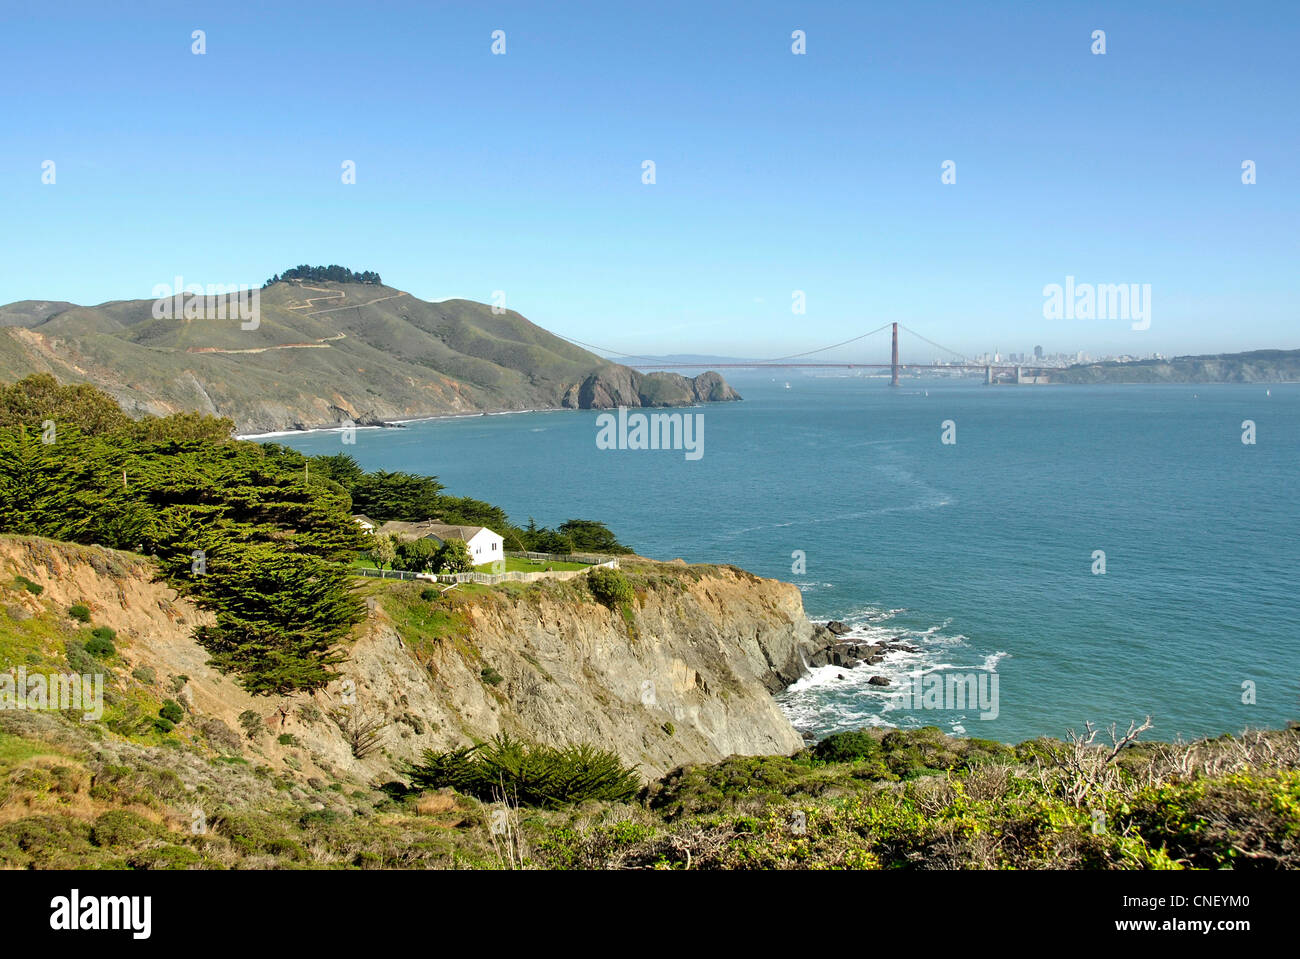 The Marin Headlands in Marin County, California, USA with view of Golden Gate Bridge Stock Photo